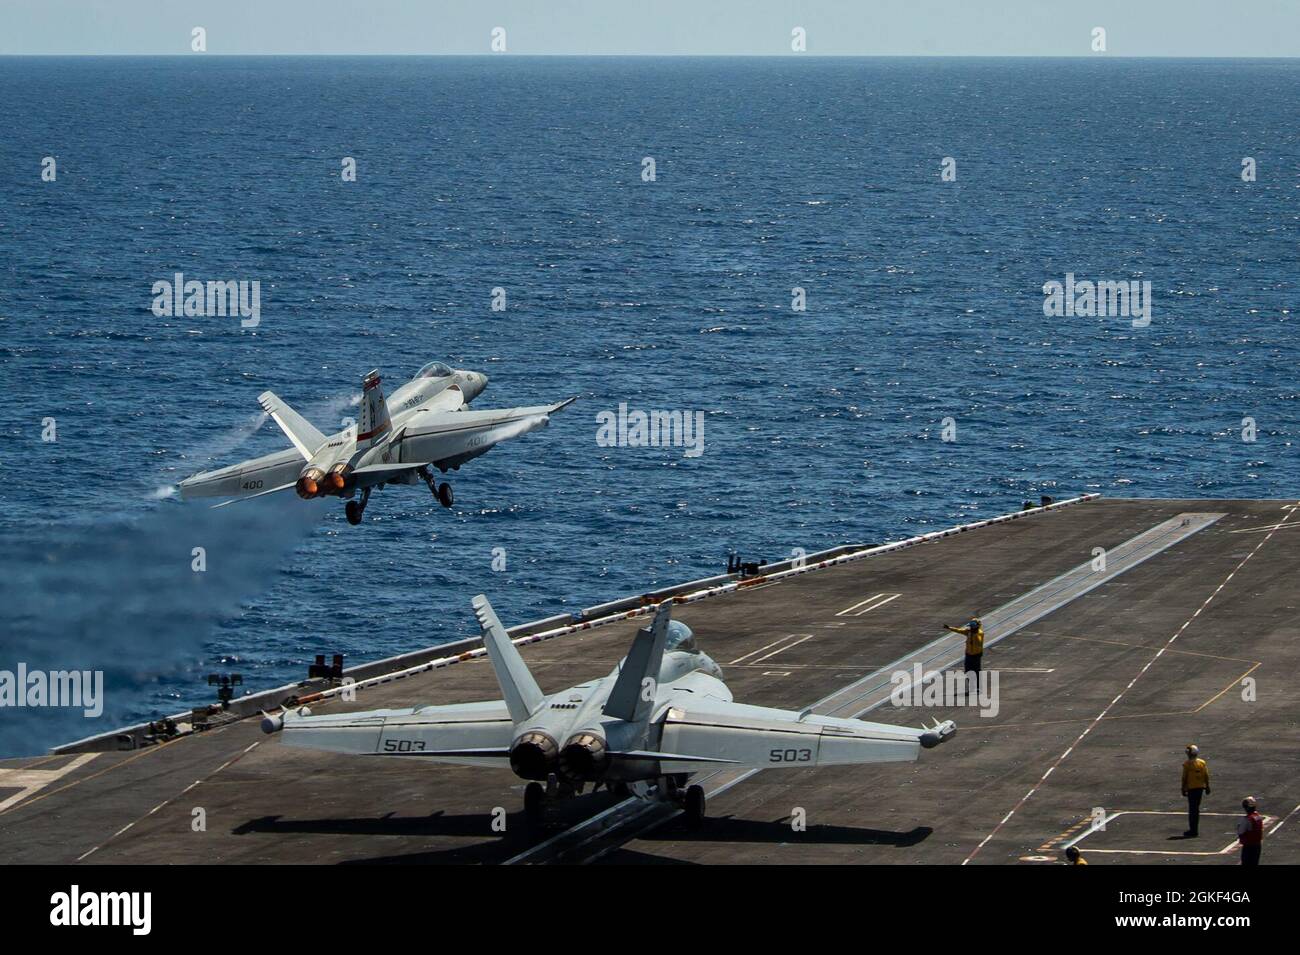 SOUTH CHINA SEA (April 6, 2021) – An F/A-18E Super Hornet, assigned to the “Golden Warriors” of Strike Fighter Squadron (VFA) 87, launches from the flight deck of the aircraft carrier USS Theodore Roosevelt (CVN 71) April 6, 2021. The Theodore Roosevelt Carrier Strike Group is on a scheduled deployment to the U.S. 7th Fleet area of operations. As the U.S. Navy’s largest forward-deployed fleet, 7th Fleet routinely operates and interacts with 35 maritime nations while conducting missions to preserve and protect a free and open Indo-Pacific Region. Stock Photo